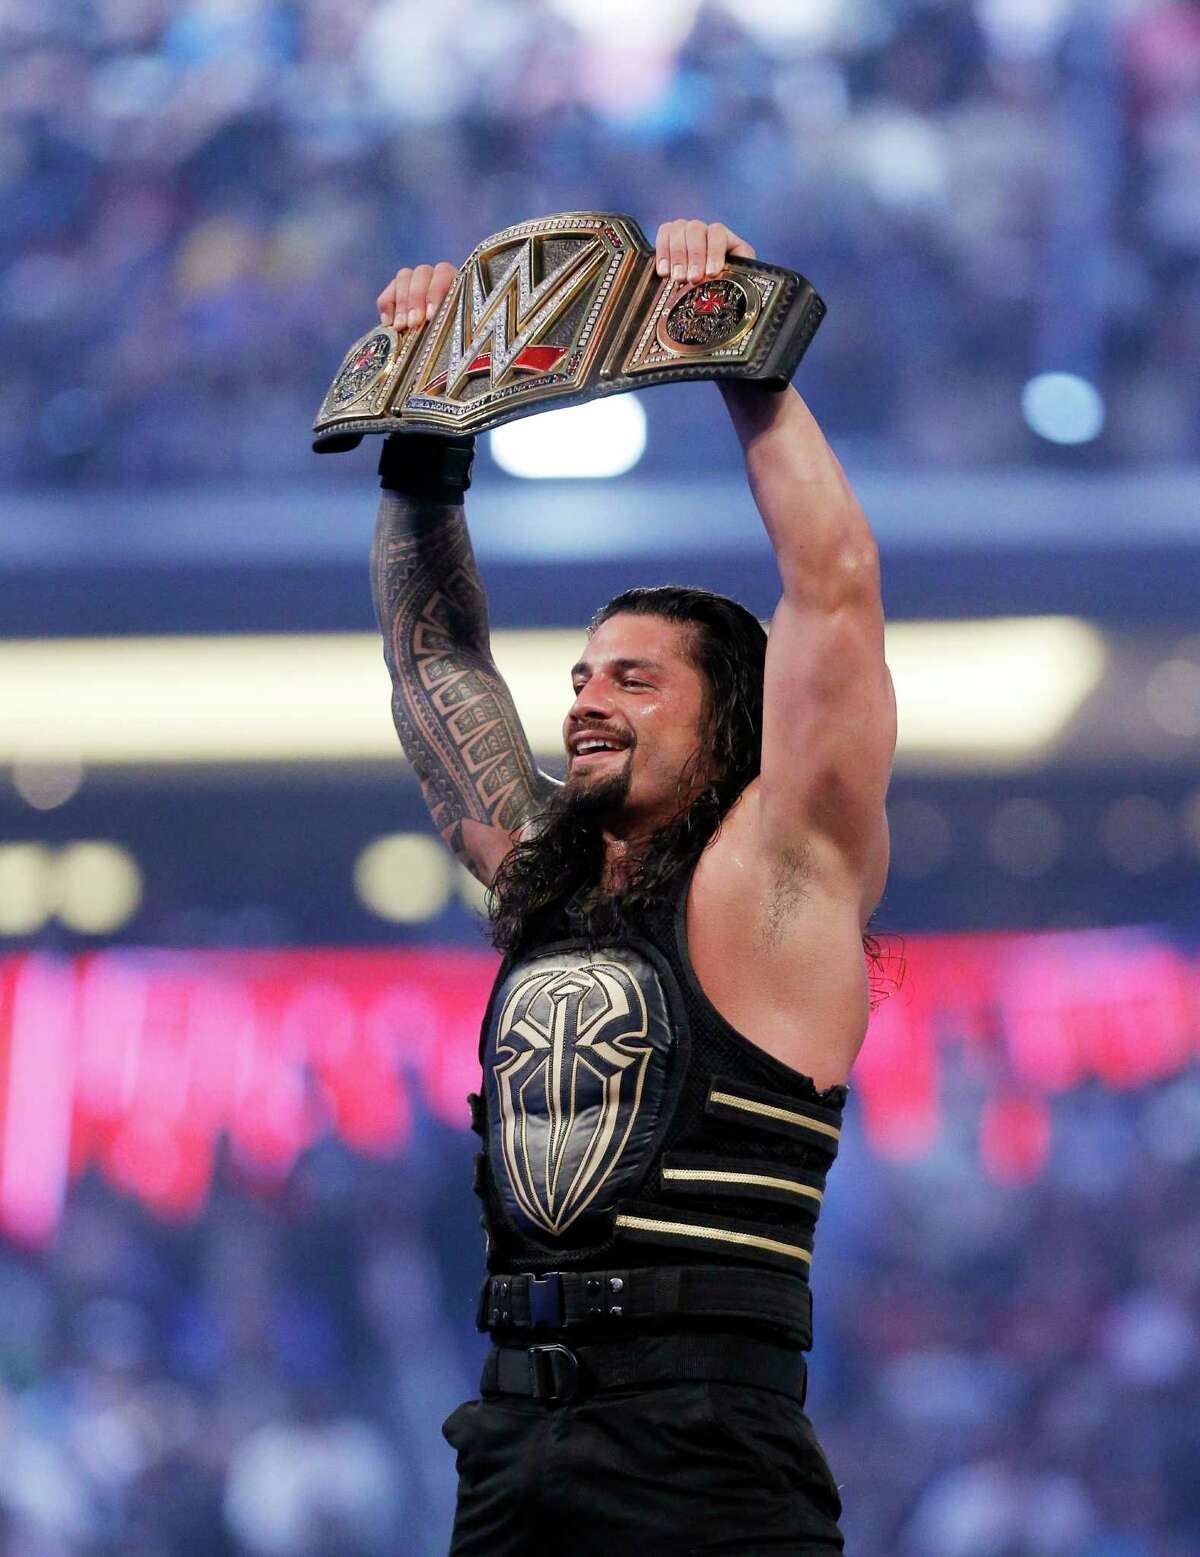 On April 3, 2016, Roman Reigns celebrates his victory at WrestleMania 32 at AT&T Stadium in Arlington, Texas. (Brandon Wade/AP Images for WWE)